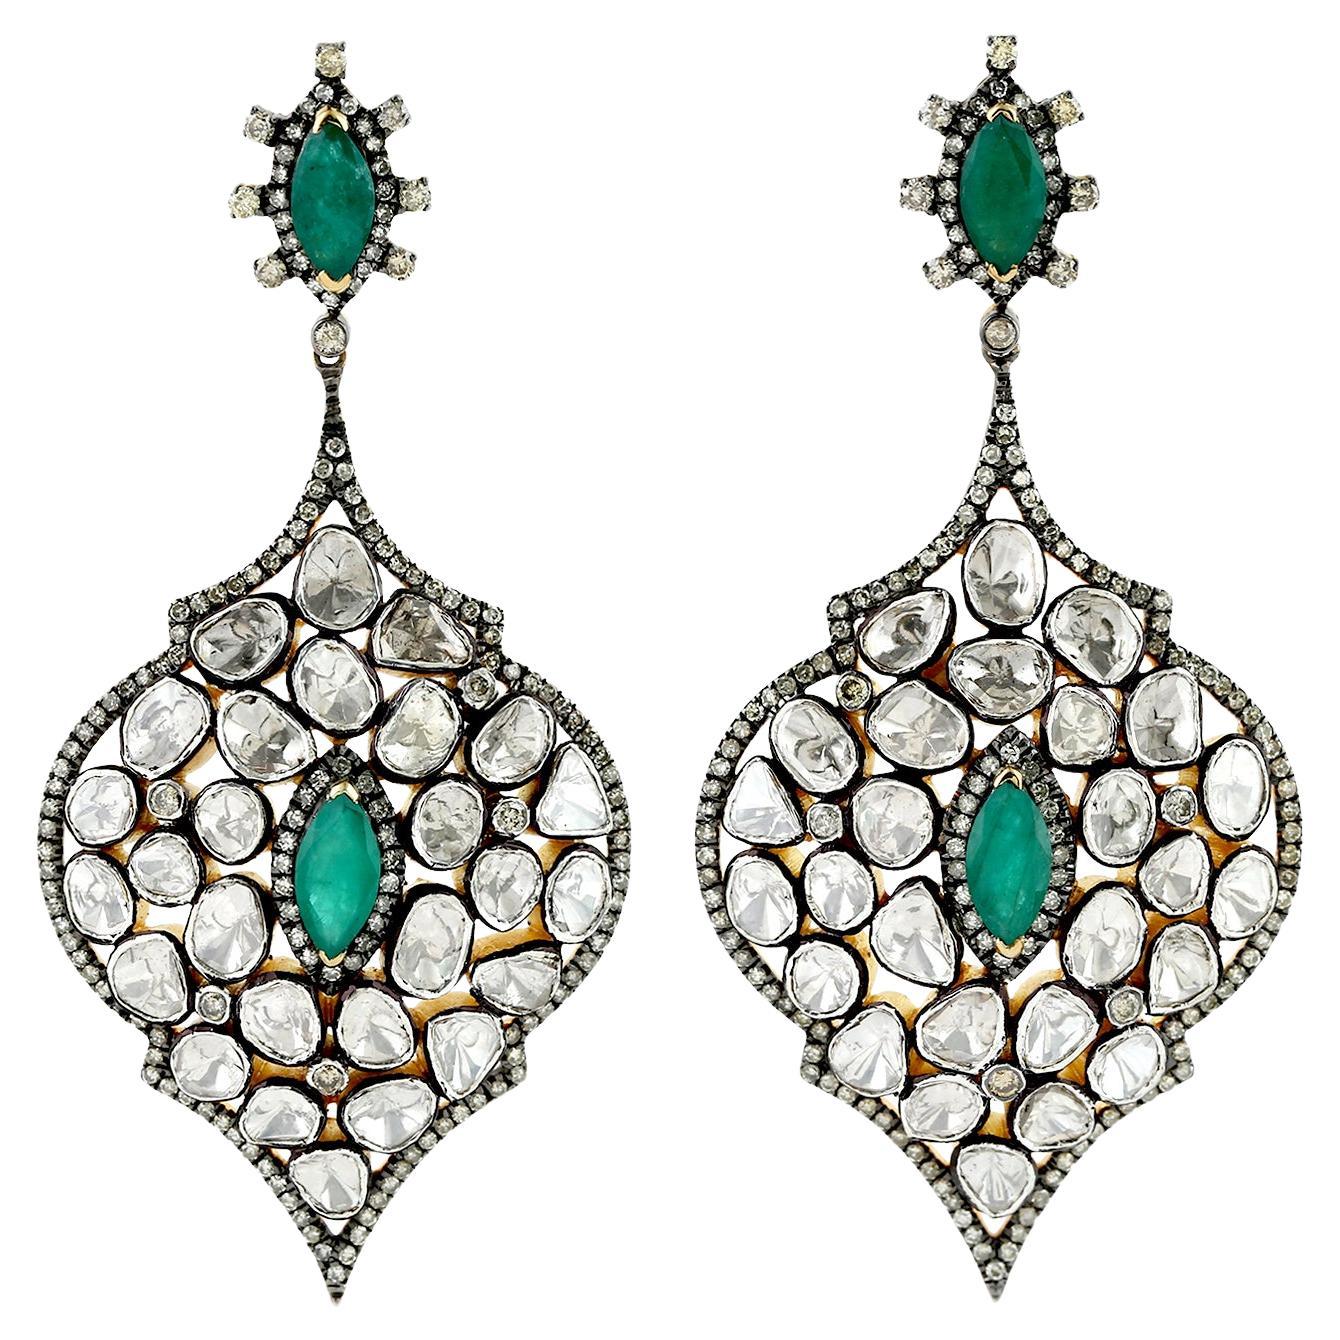 14.49ct Rosecut Diamond Dangle Earrings With Emerald In 18k Yellow Gold & Silver For Sale